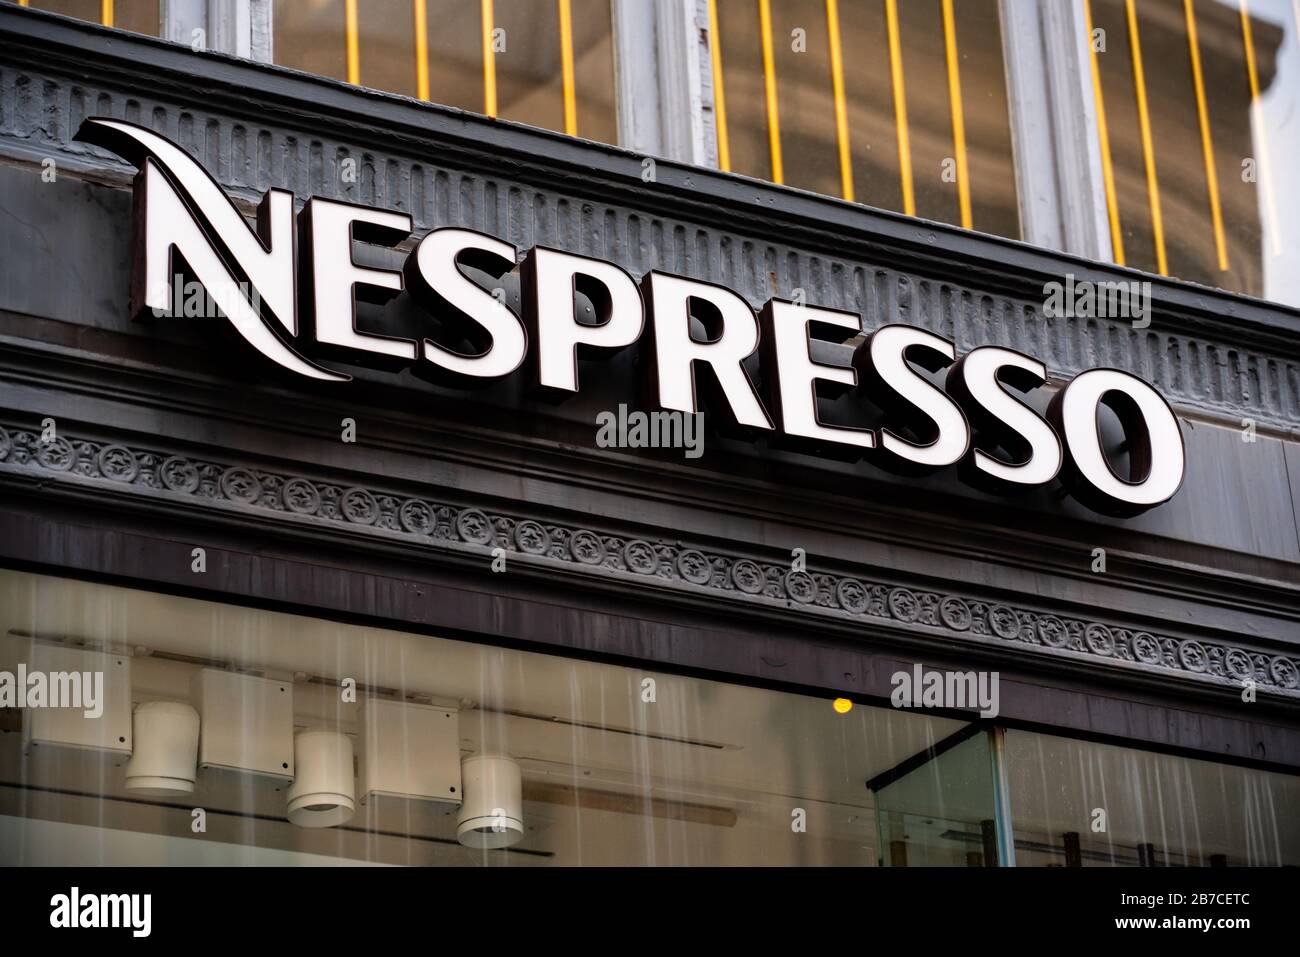 A Swiss coffee capsules brand and a unit of the Nestle Group, Nespresso logo seen at one of their stores. Stock Photo